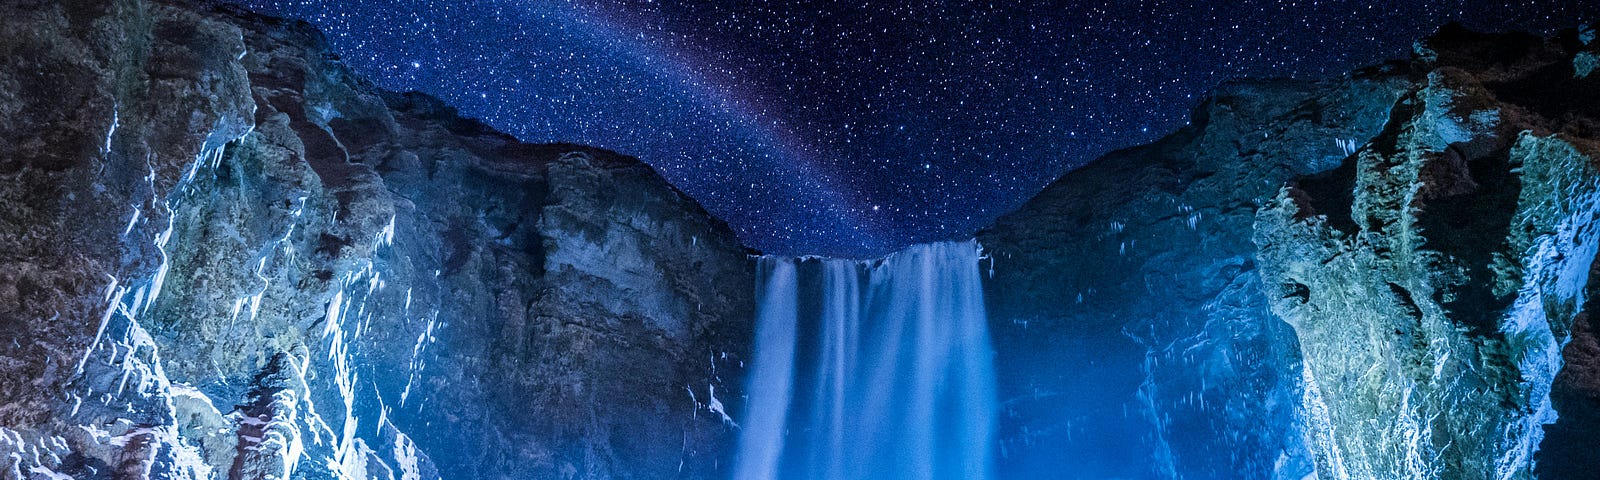 Waterfall at night beneath the starry sky.